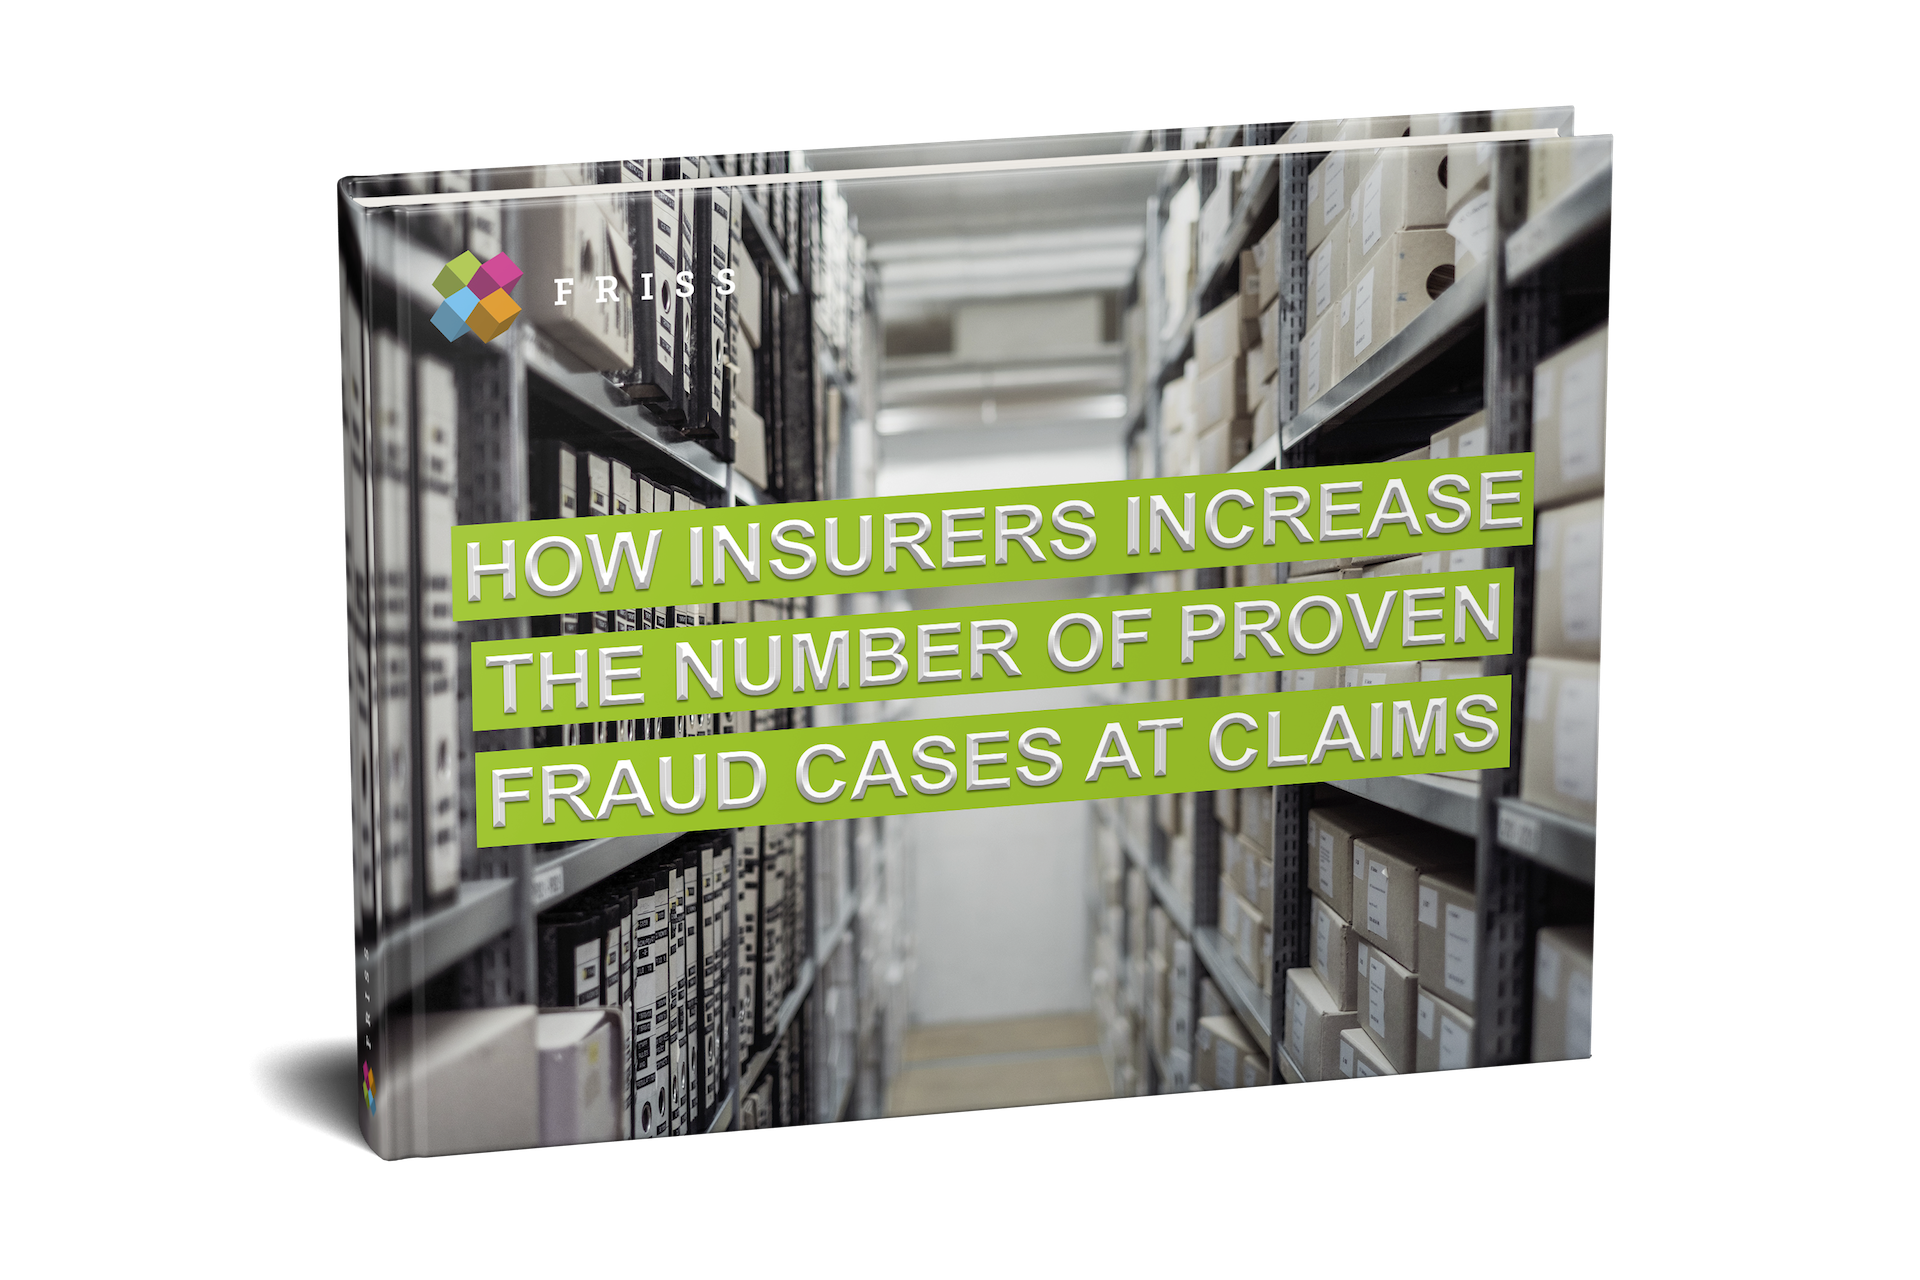 LARGE - ebook - How insurers increase the number of proven fraud cases at claims